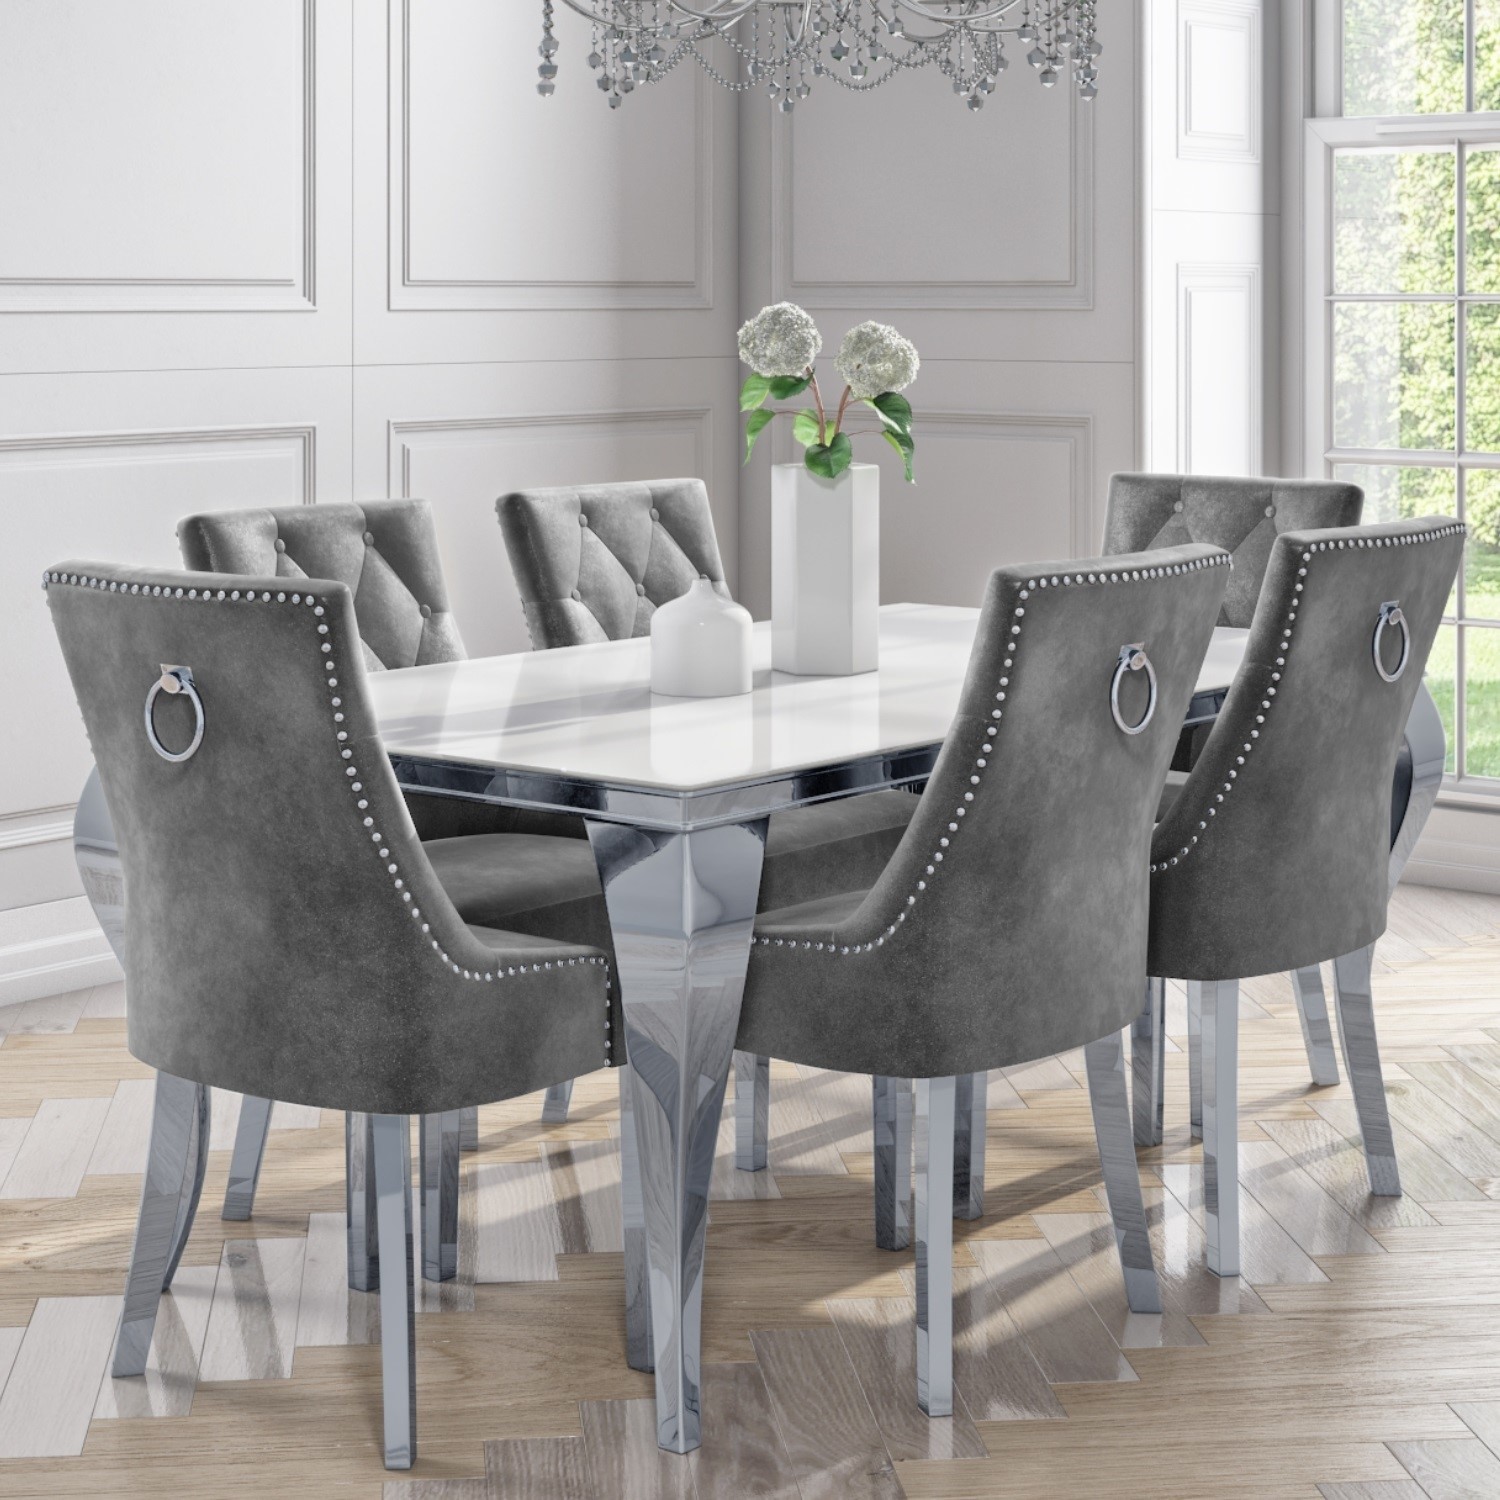 White And Mirrored Dining Table With 6, How Big Of A Round Table For 6 Chairs